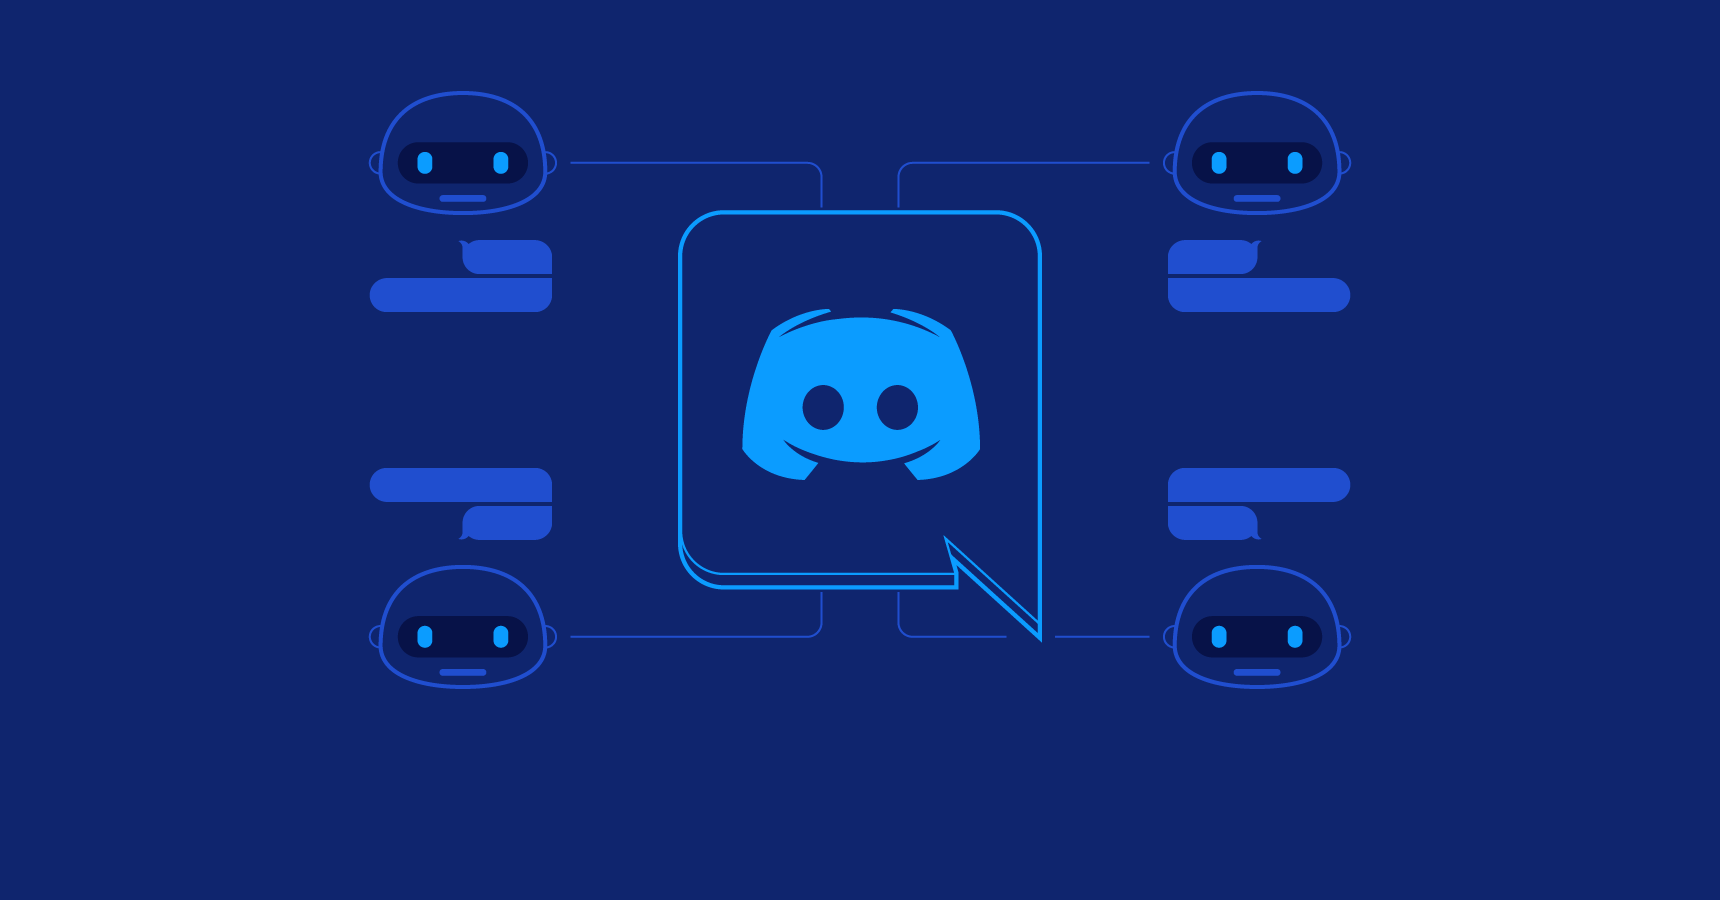 How to Make a Discord Bot: an Overview and Tutorial